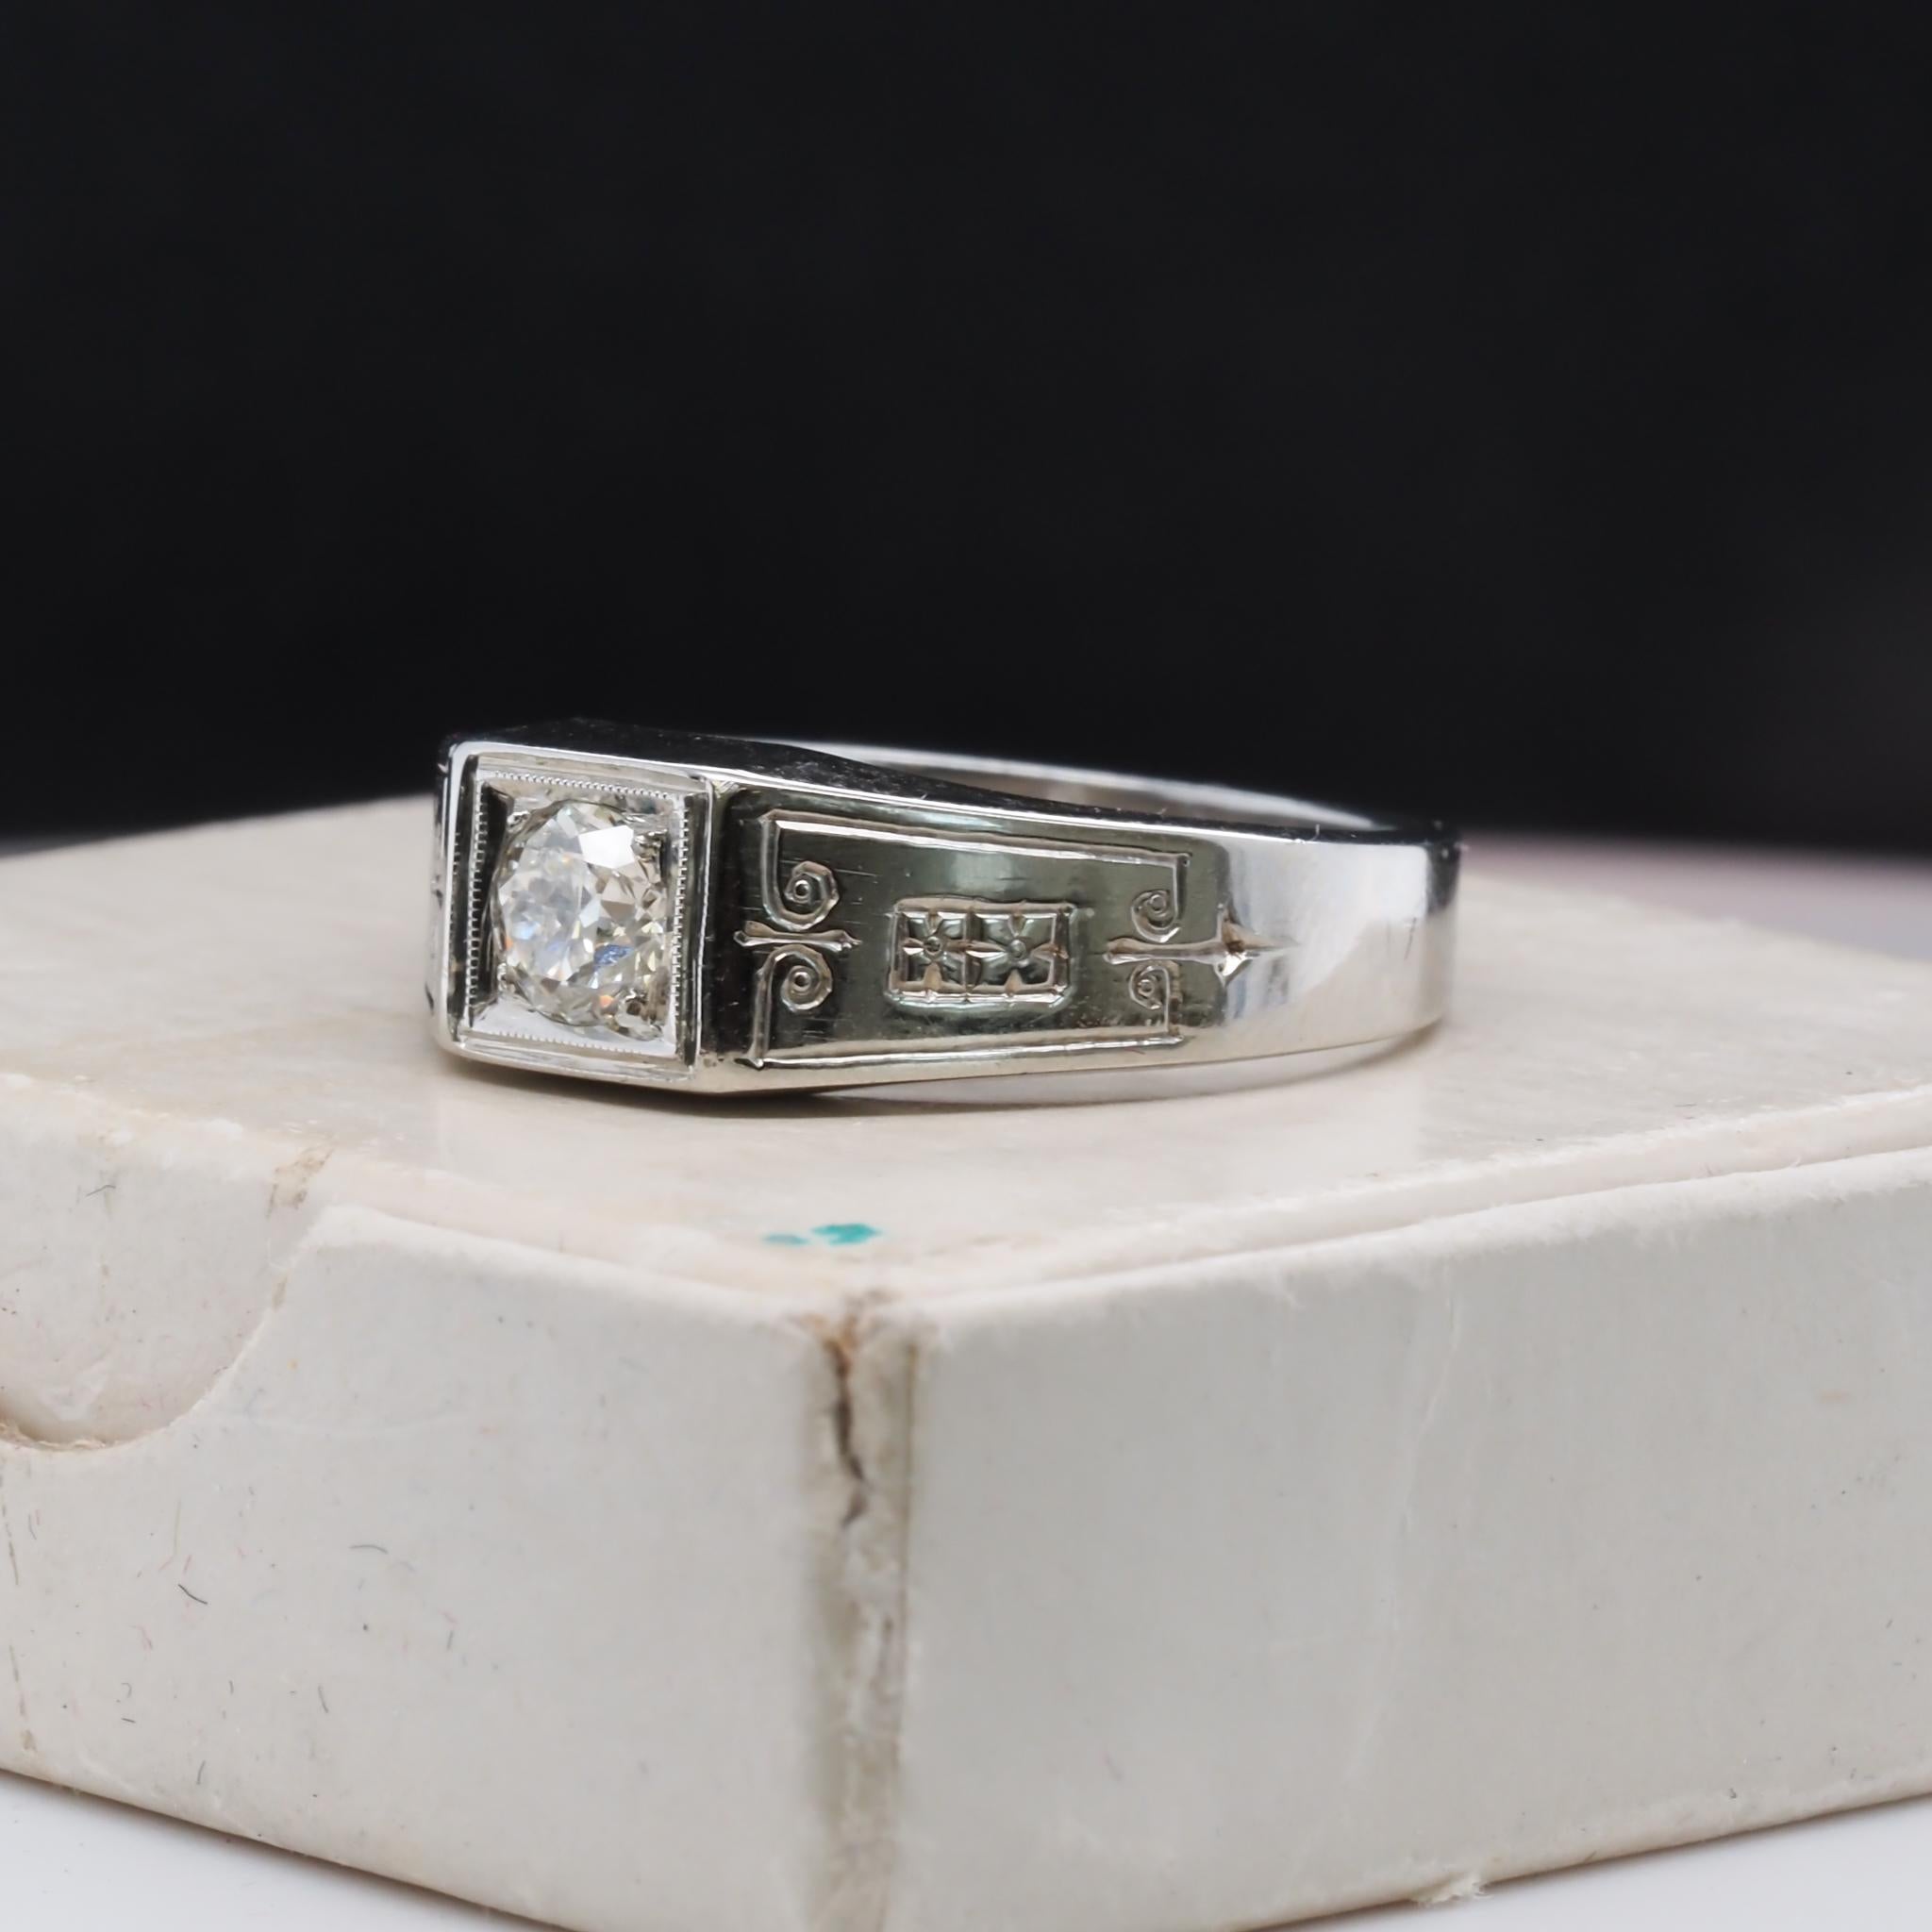 Ring Size: 9
Metal Type: 18k White Gold [Hallmarked, and Tested]
Weight: 6.0 grams
‌
Diamond Details:
Weight: .45ct
Cut: Old European Brilliant
Clarity: VS1
Color: I
‌
Band Width: 3.75 mm
Condition: Excellent